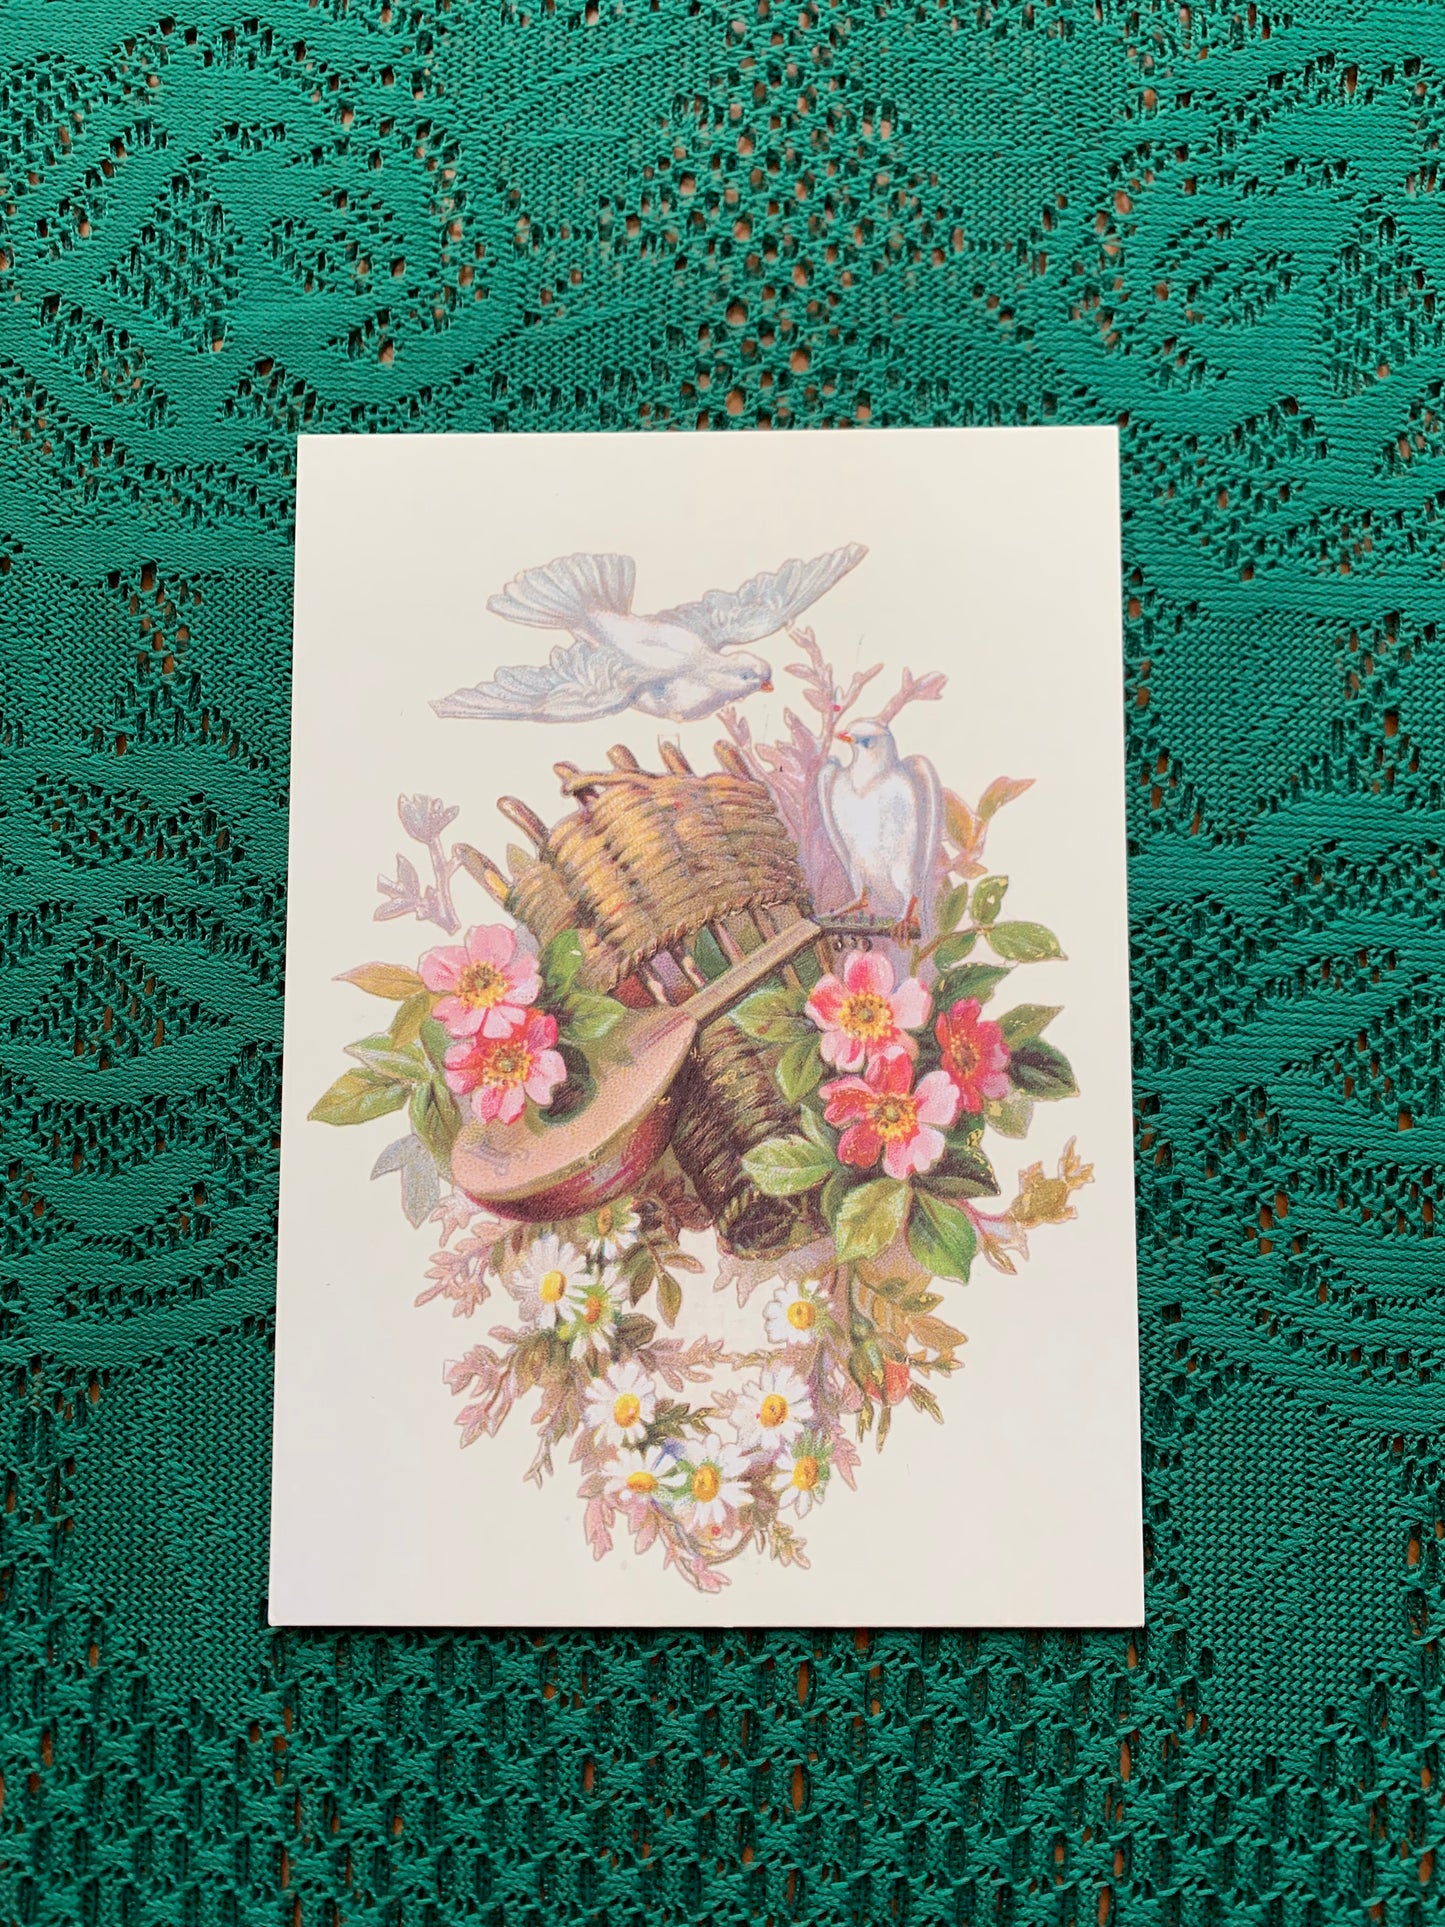 Finnish art postcard - Printed in Finland - Greeting card, collectible postcard - Flowers - unused